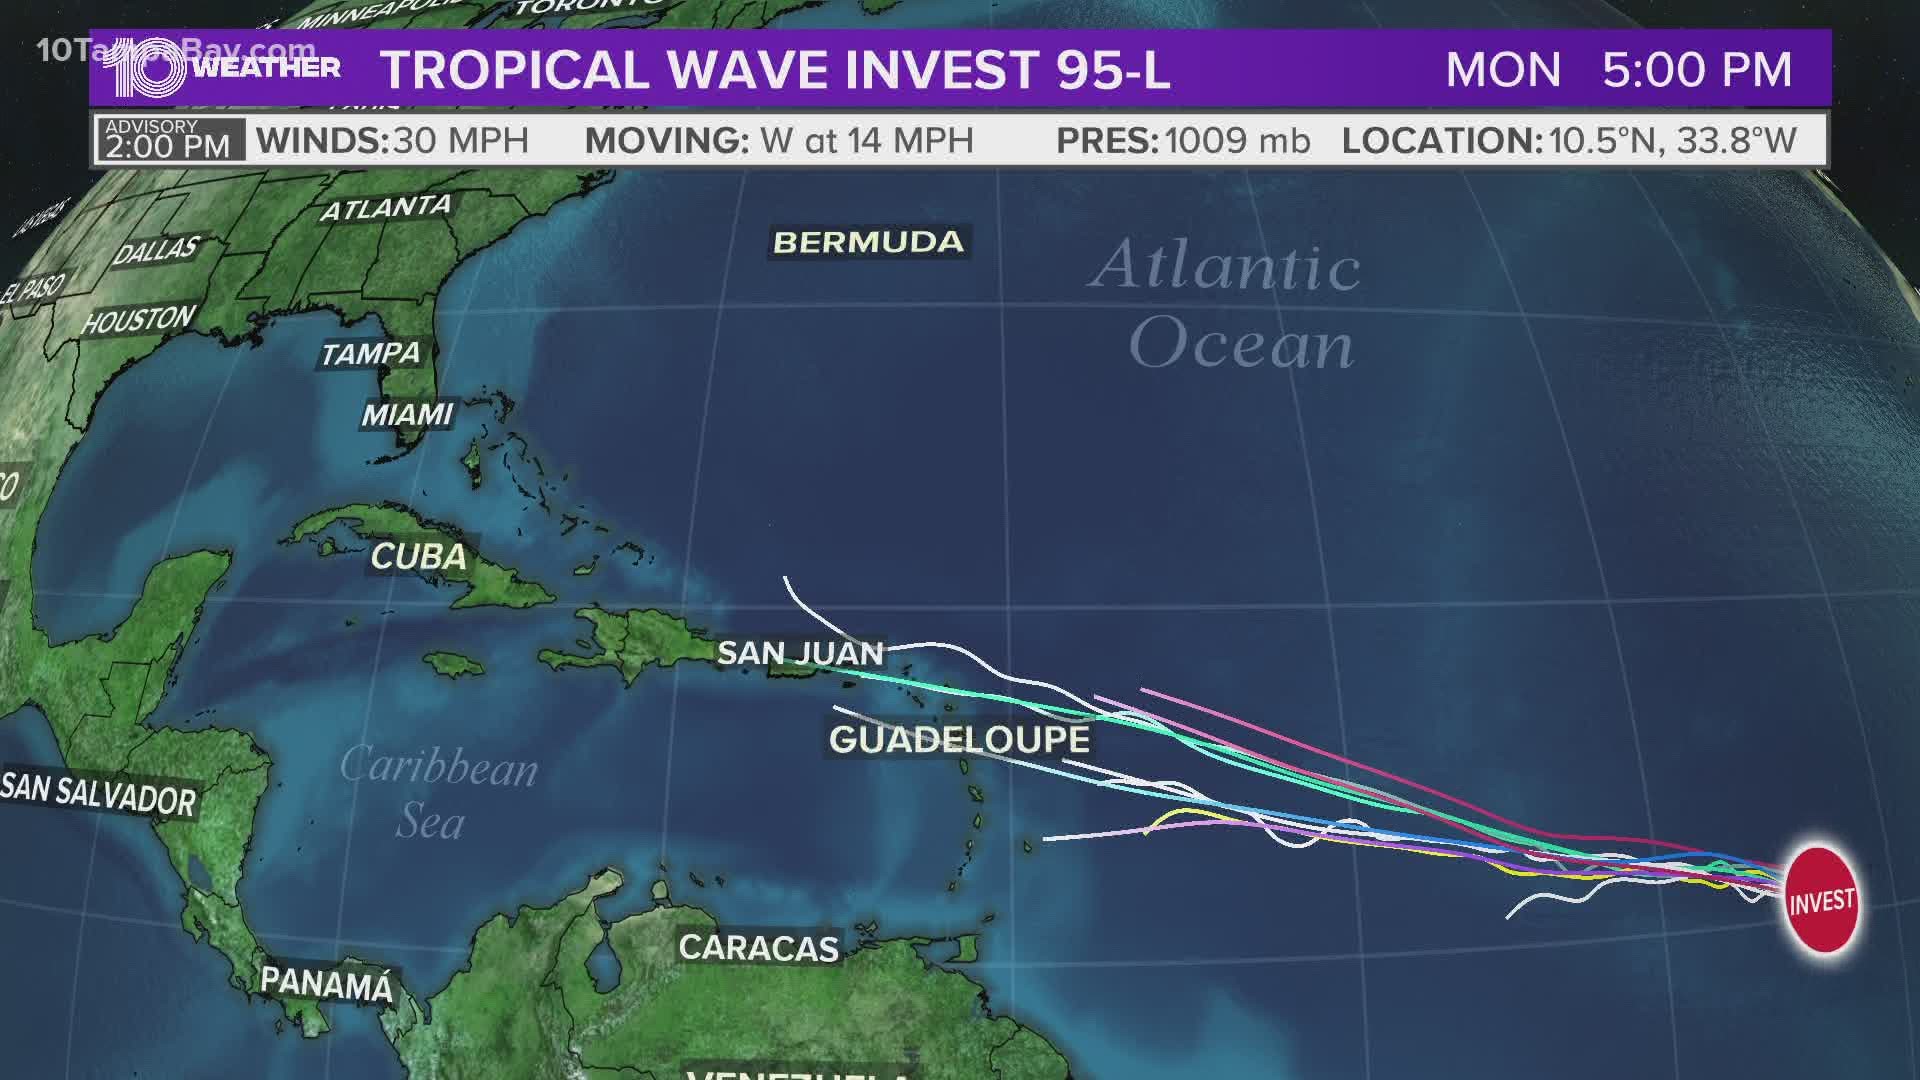 10 Tampa Bay Chief Meteorologist Bobby Deskins takes a look at the tropics.